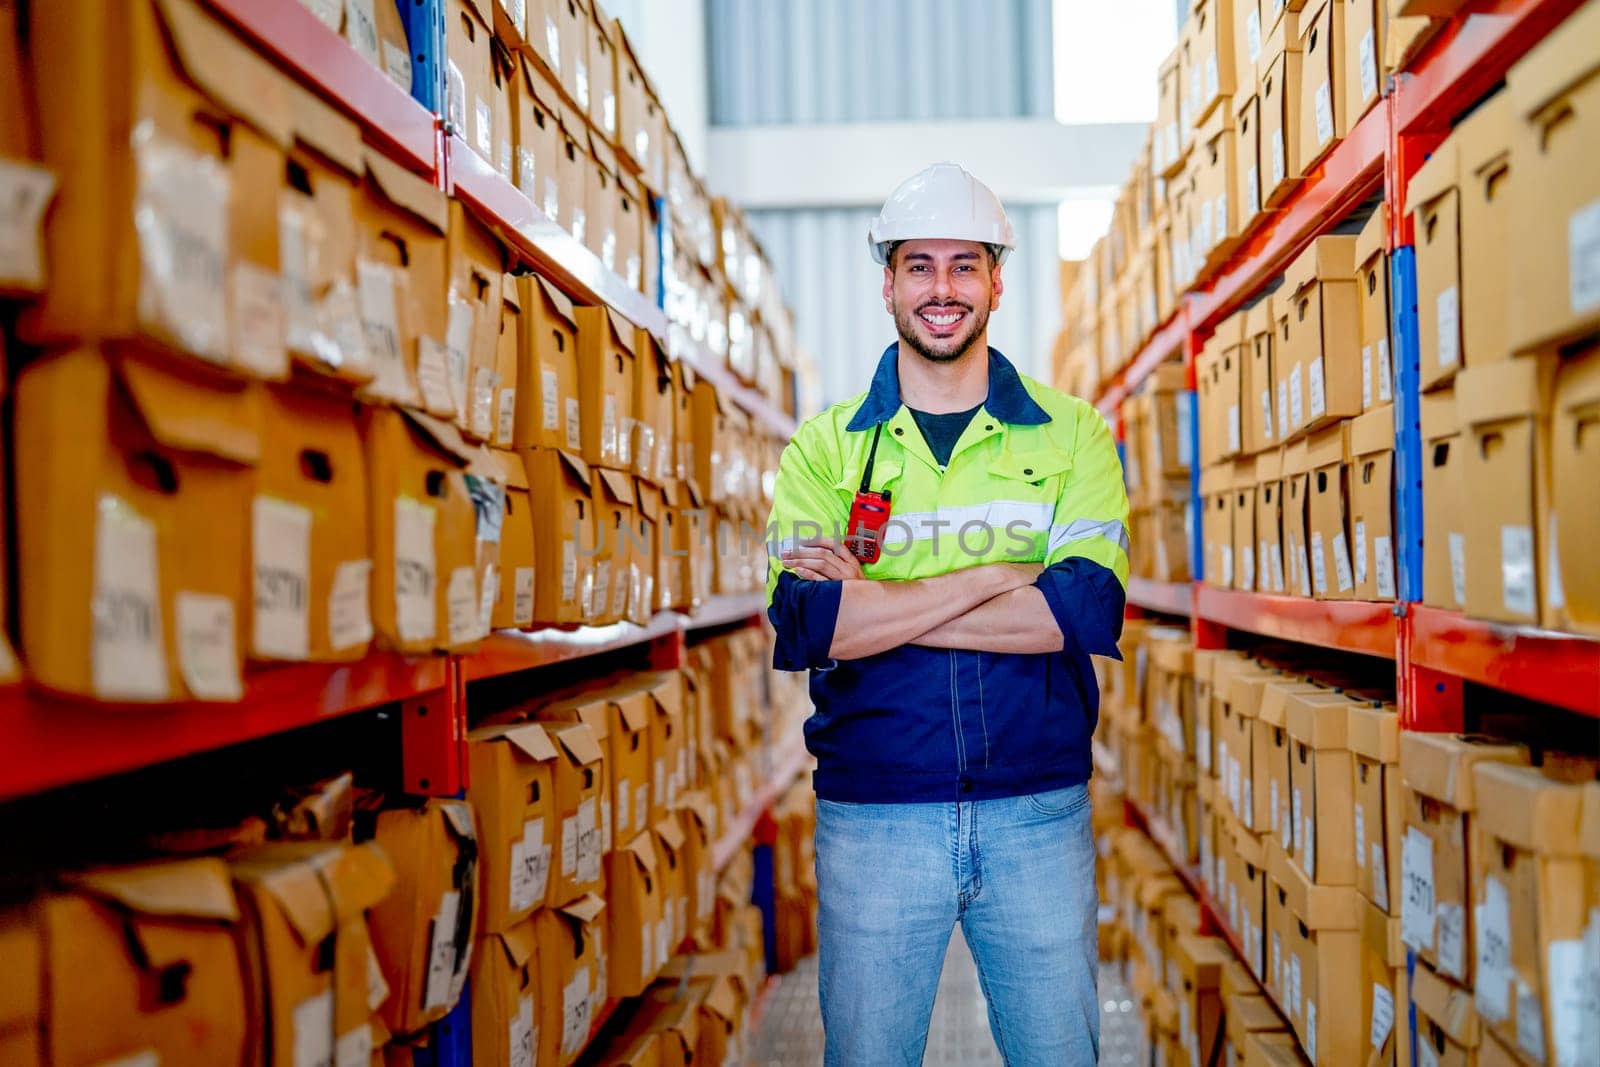 Professional warehouse worker man stand with arm-crossed and smiling to camera also stay between shelves of product boxes in workplace area. by nrradmin